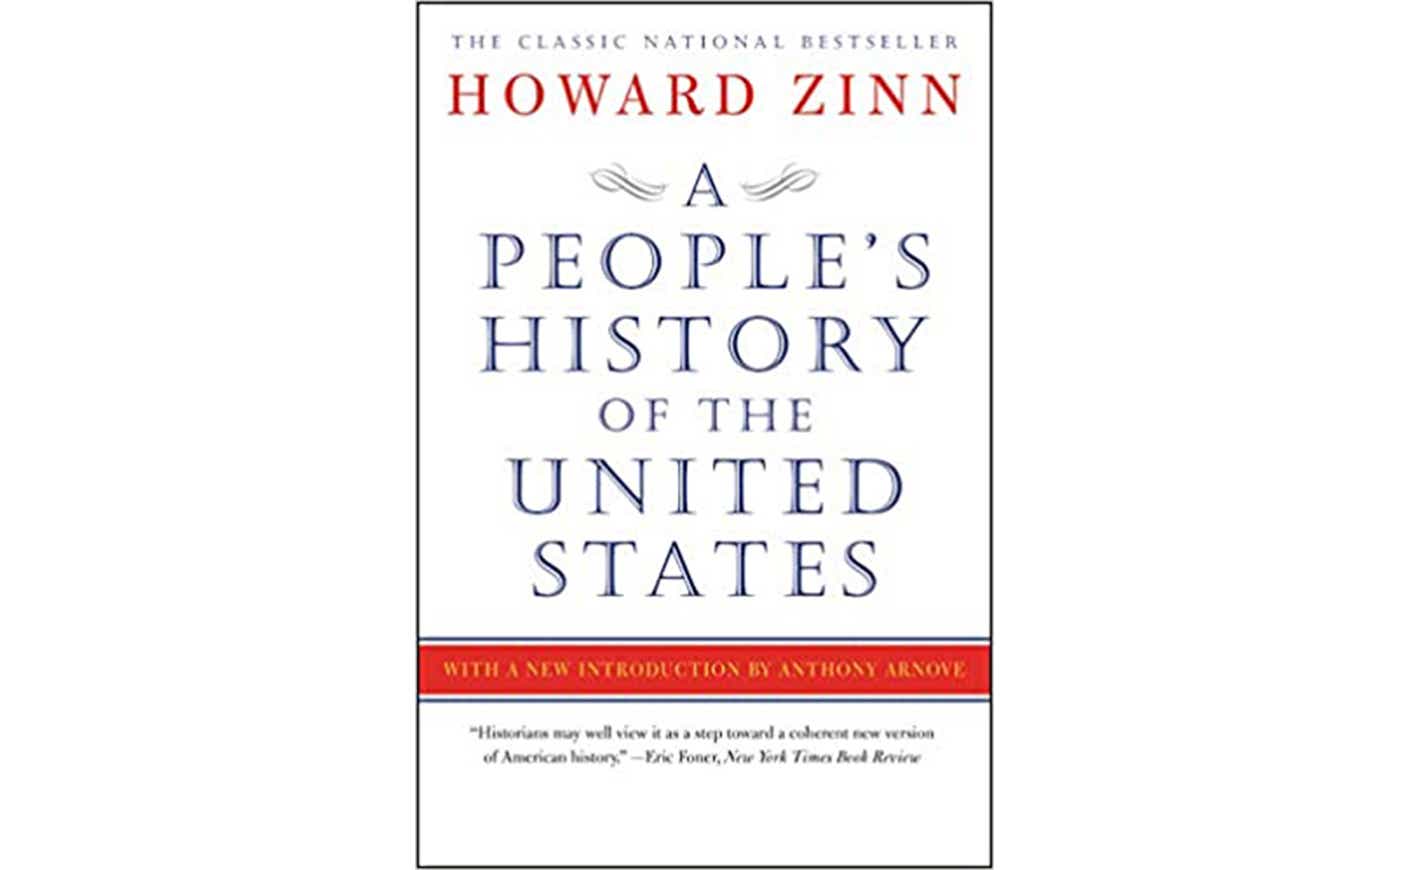 a people's history of the u.s